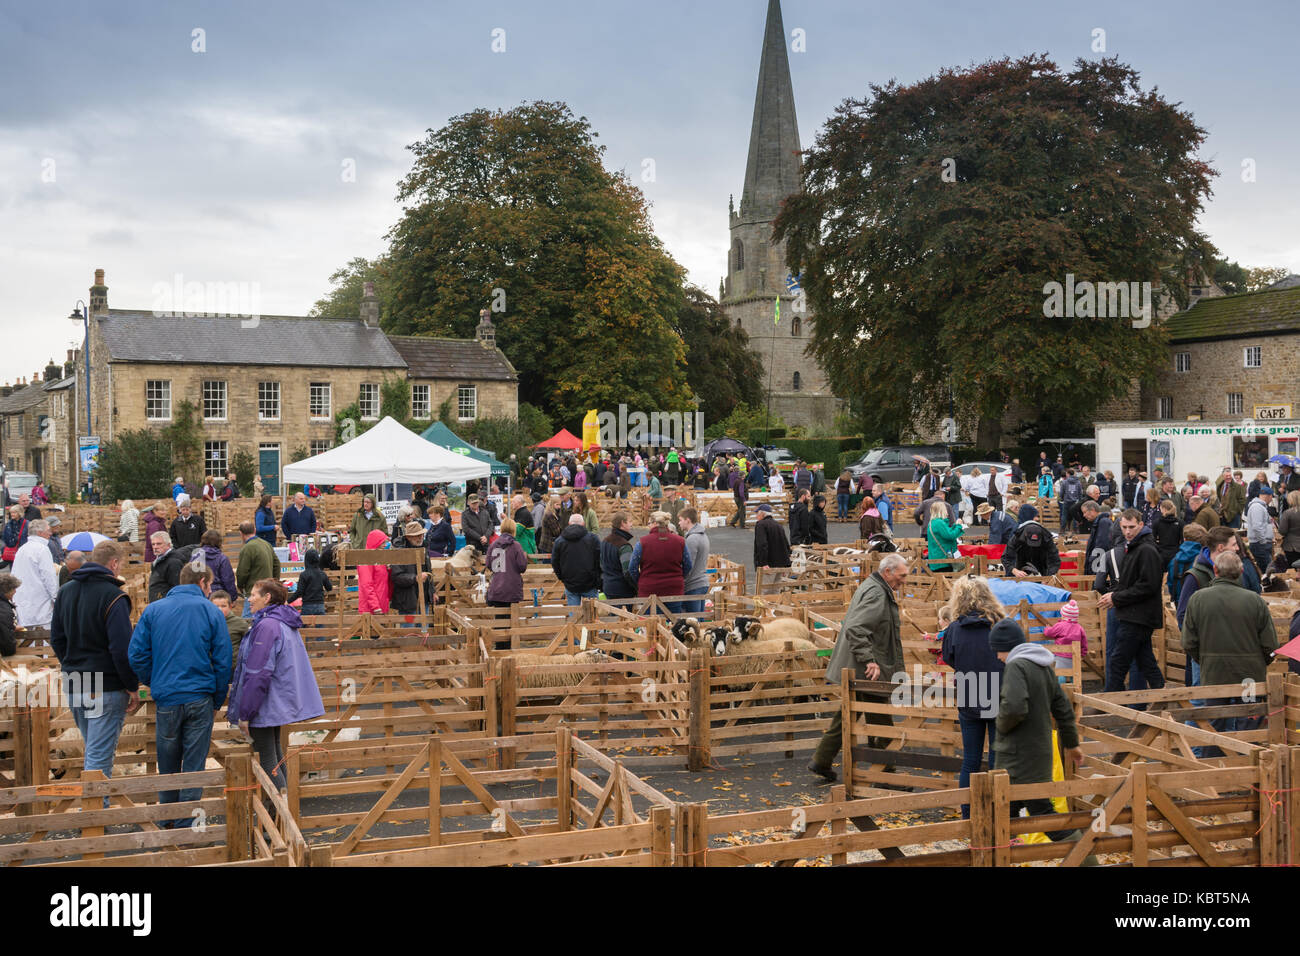 Masham, North Yorkshire, UK 30th September 2017. The Masham historic Sheep Fair held over 2 days each year in the towns market square sees competitors and judges from England, Scotland, Ireland and Wales. Andrew Fletcher/Alamy Live News Stock Photo